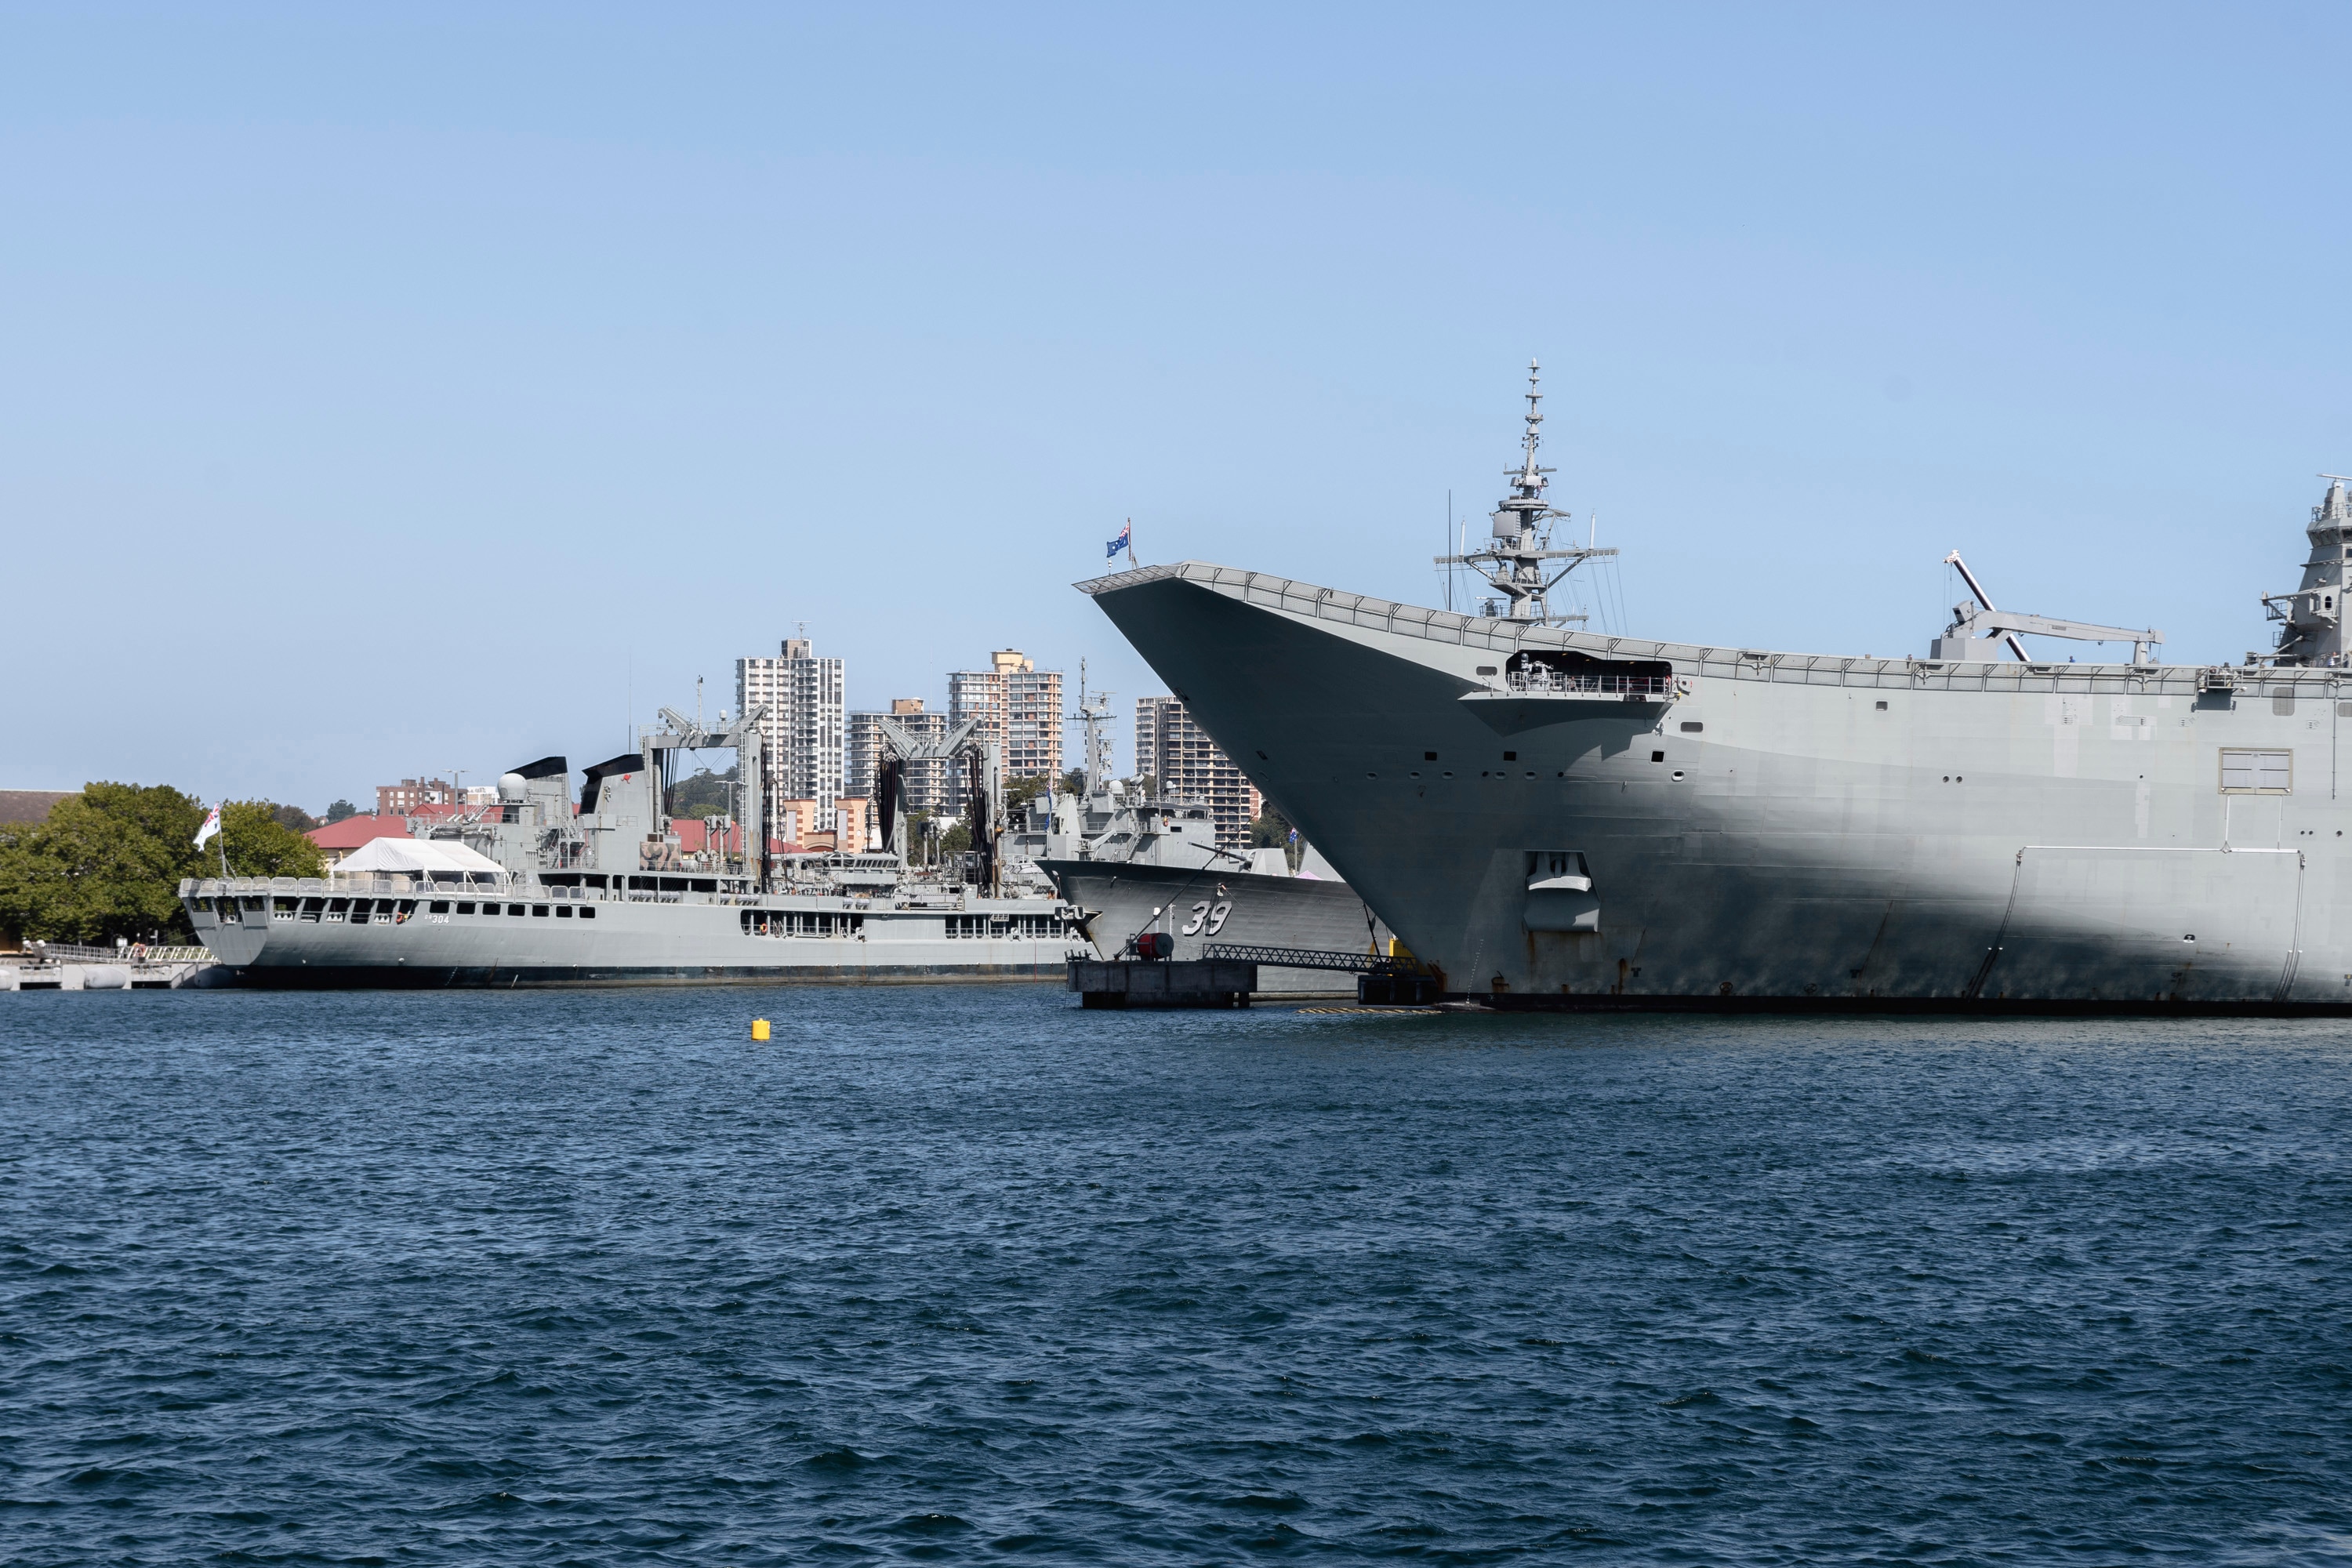  - Ships HMAS Success (OR 304), HMAS Hobart (DDG 39) and HMAS Canberra (L02) are seen docked in port in Sydney, Australia, on 23rd February 2019, in archival photo. Australia, the United Kingdom and the United States announced a new military pact, the AUK